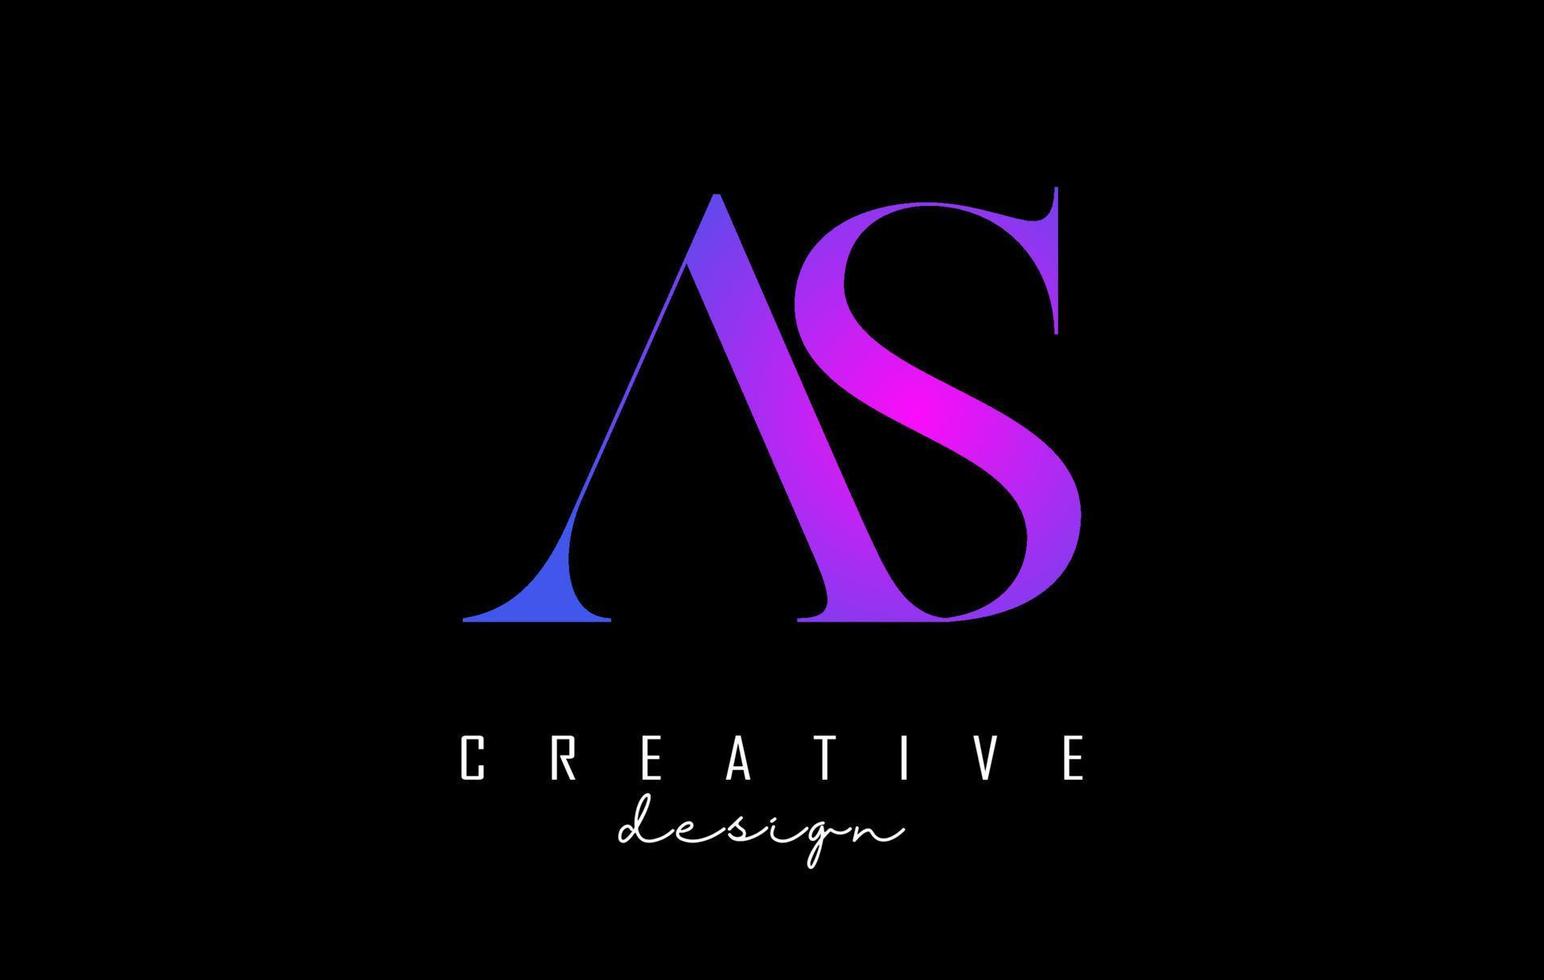 Colorful pink and blue AS a s letters design logo logotype concept with serif font and elegant style vector illustration.